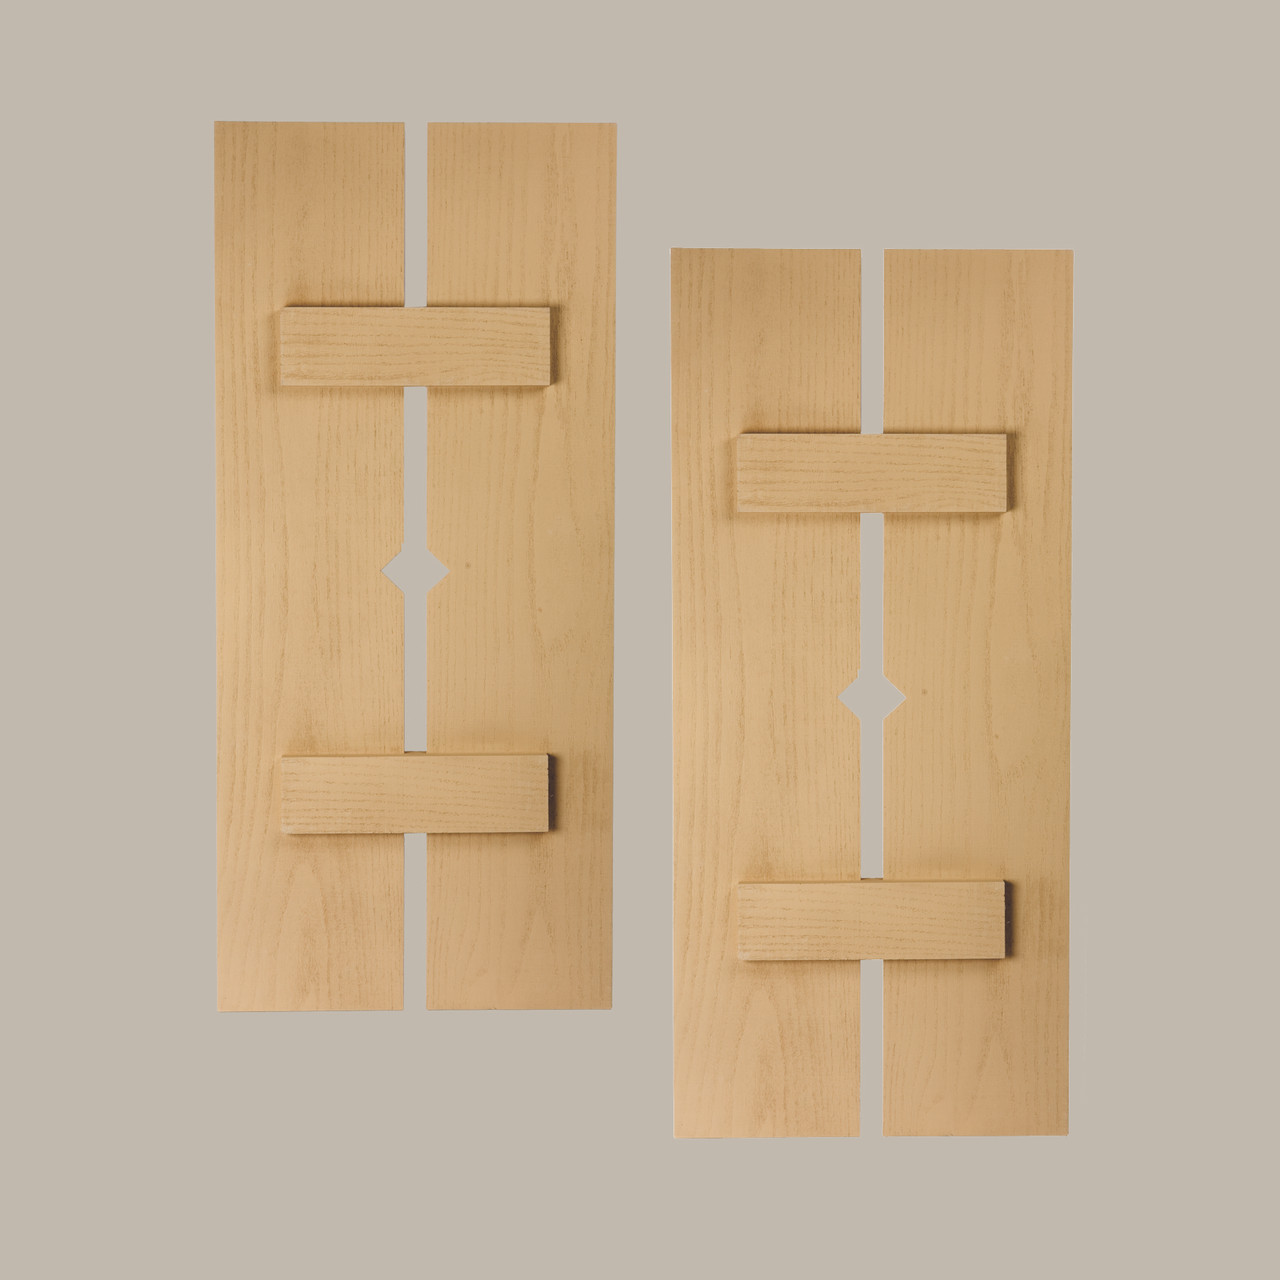 12 inch by 32 inch Plank Shutter with 2-Plank, Diamond